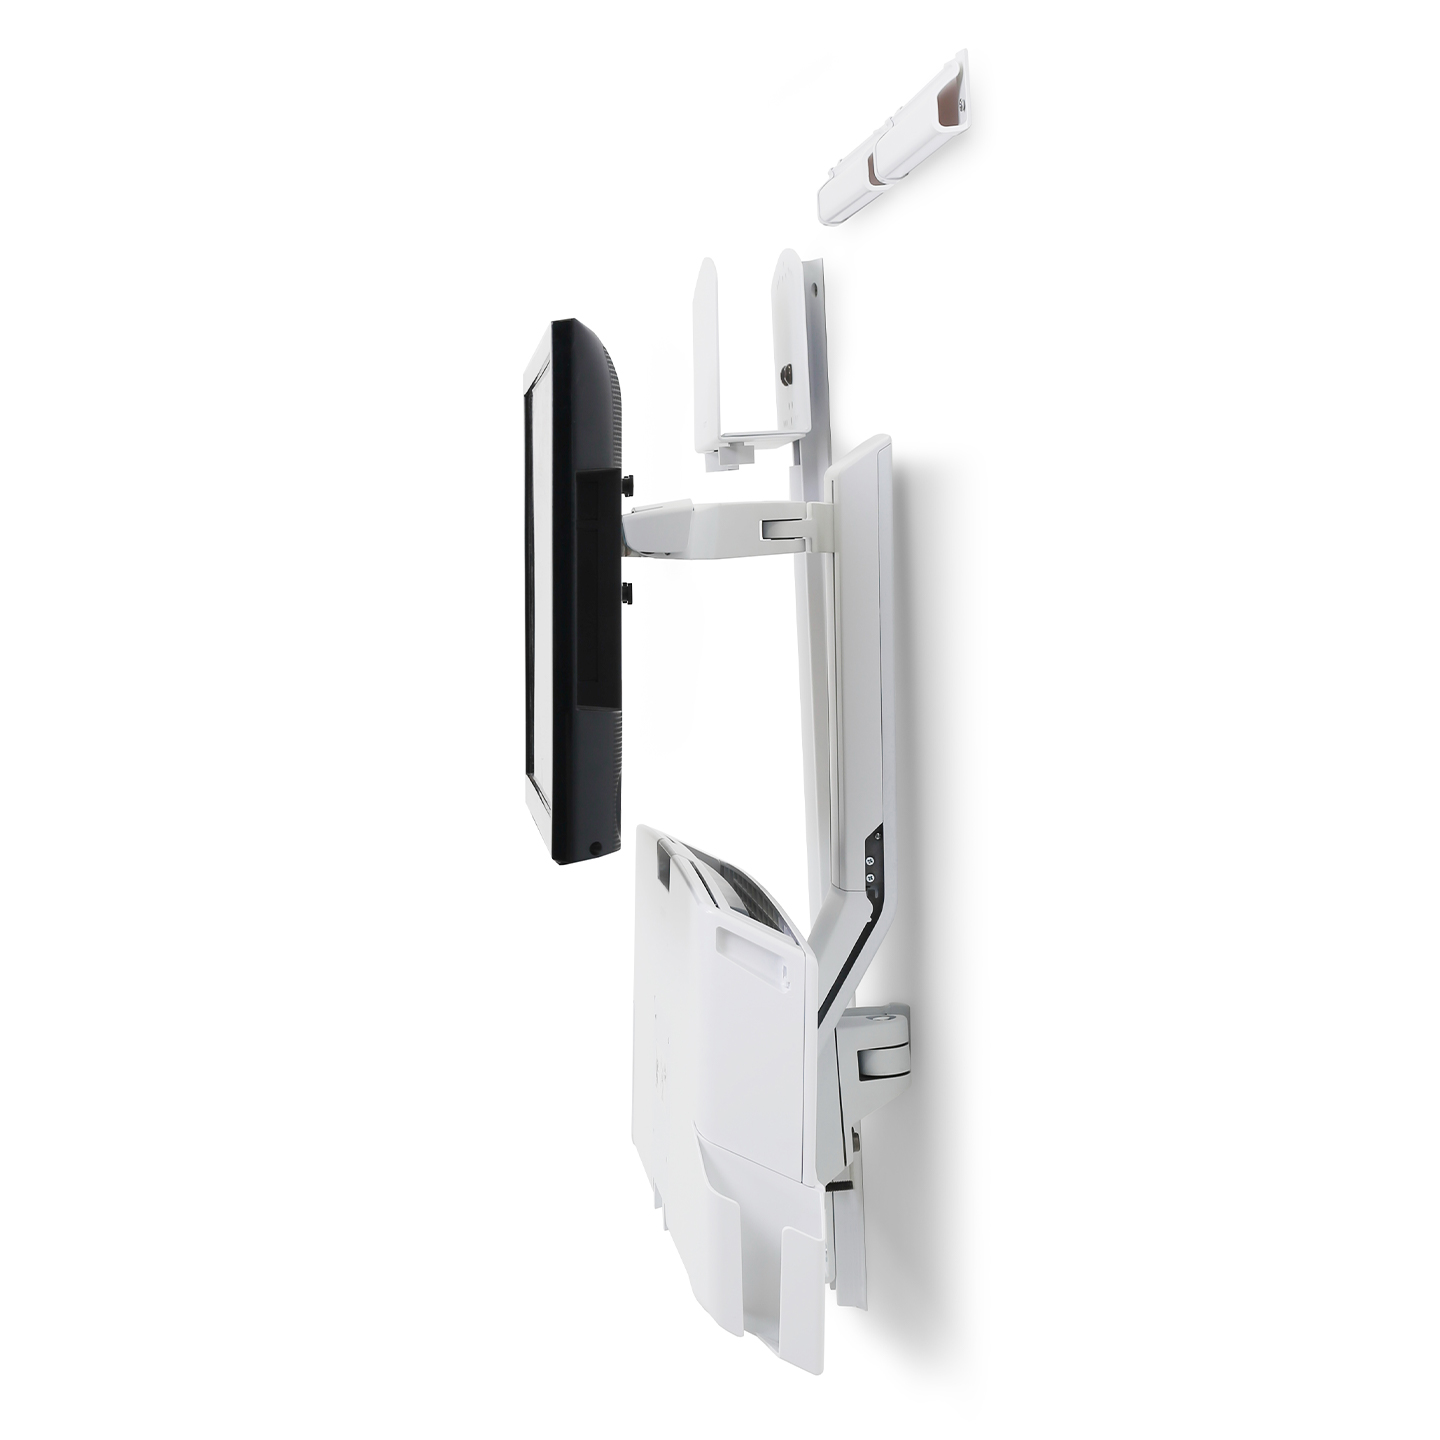 Haworth StyleView Sit to Stand Workspace folded up against wall with monitor in white color